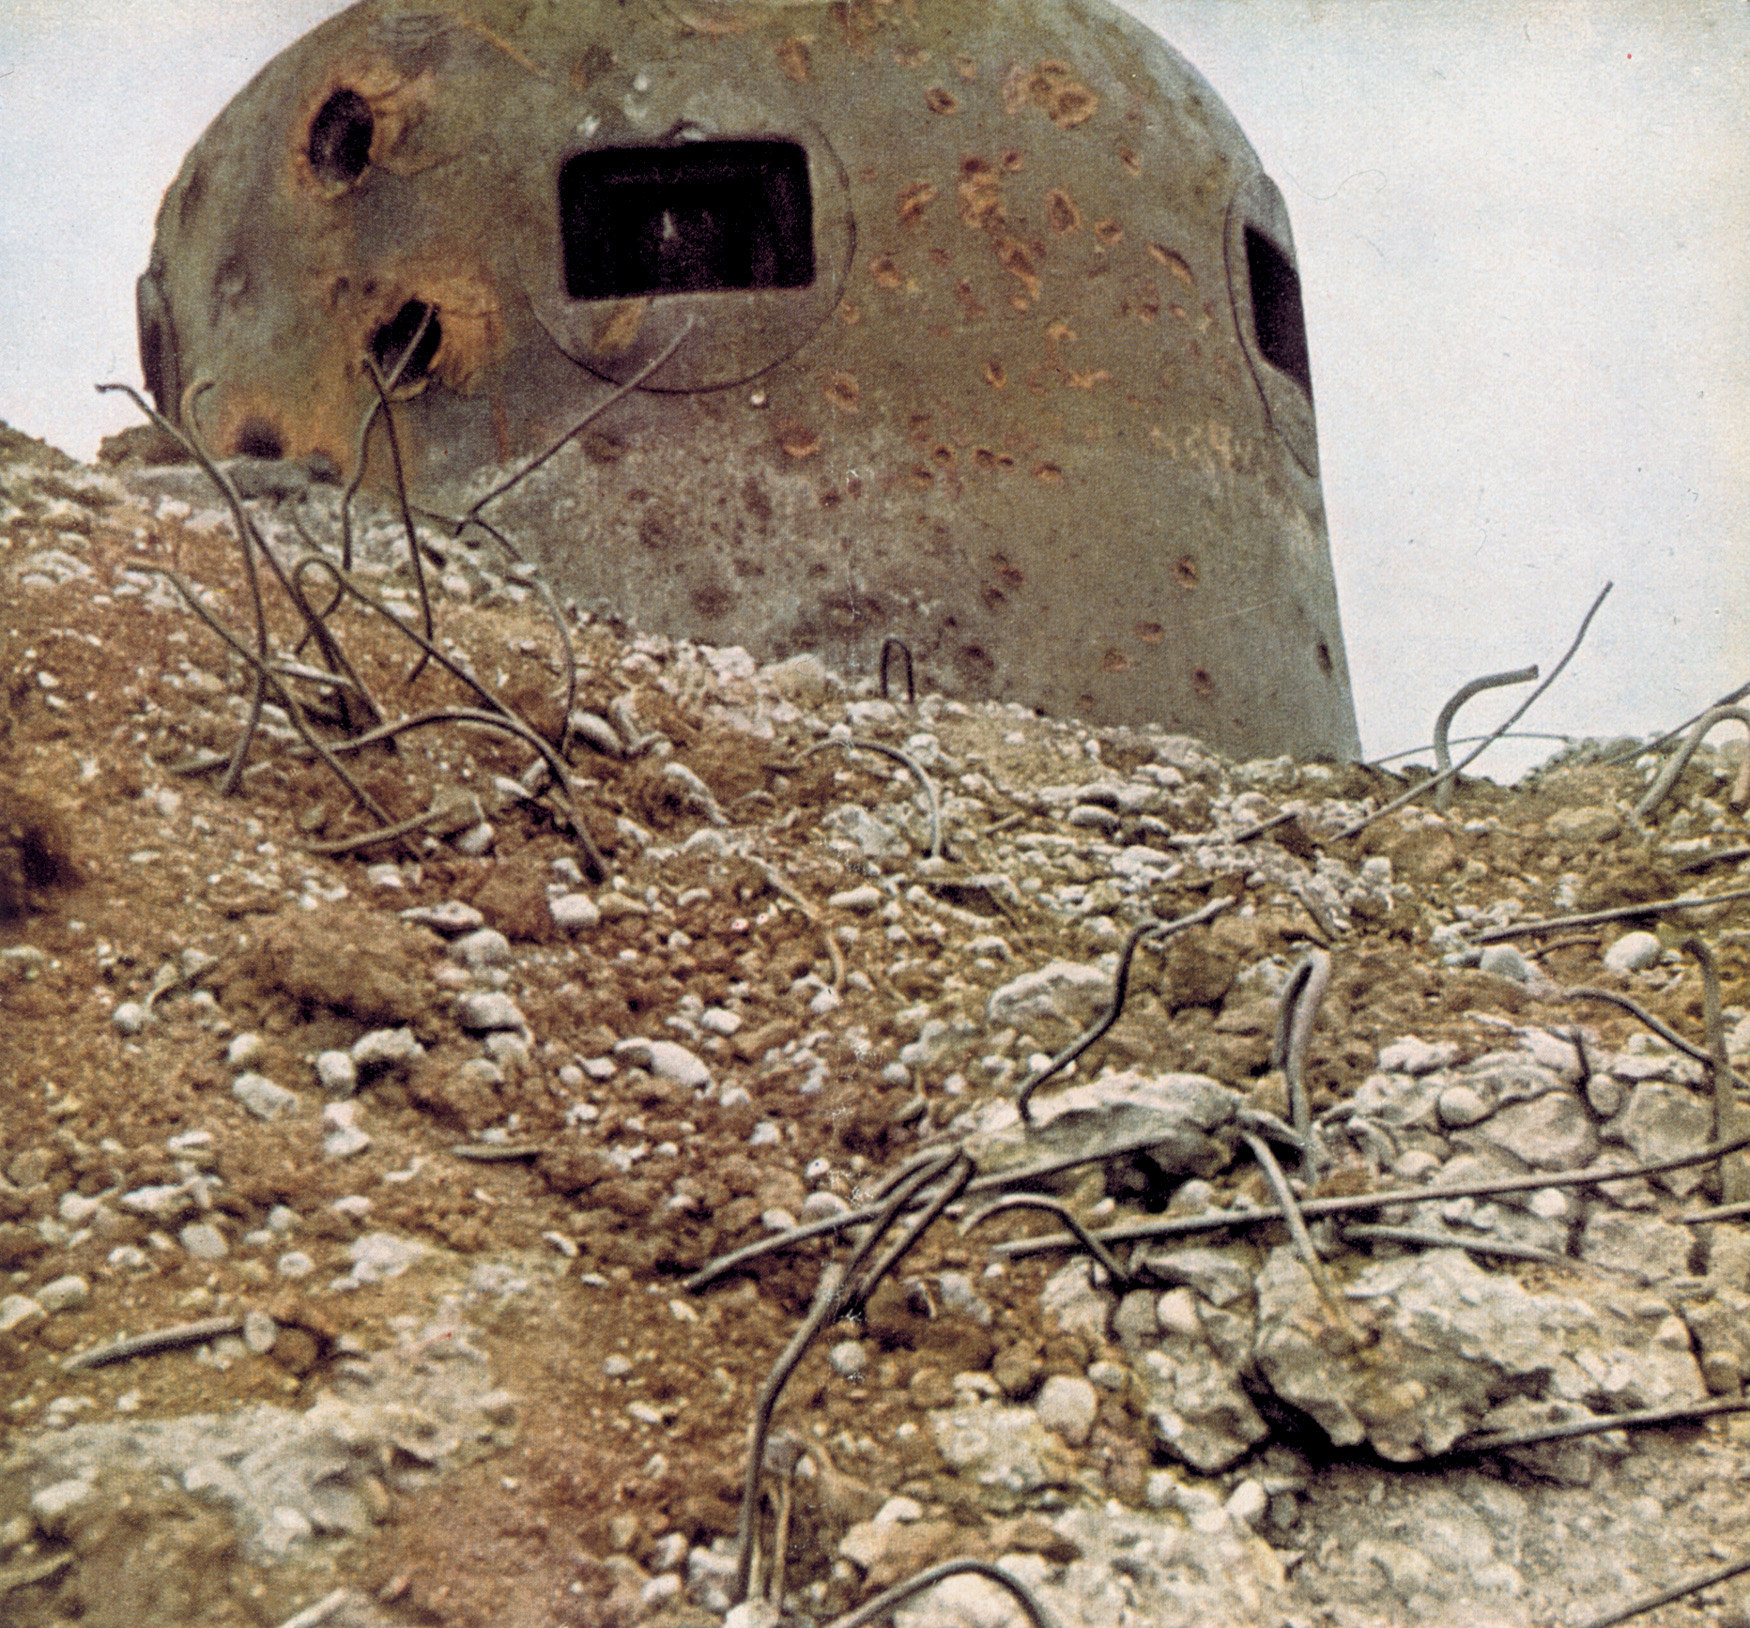 Bearing scars from the artillery fire of its attackers, this Maginot artillery bunker was silenced by the Germans.